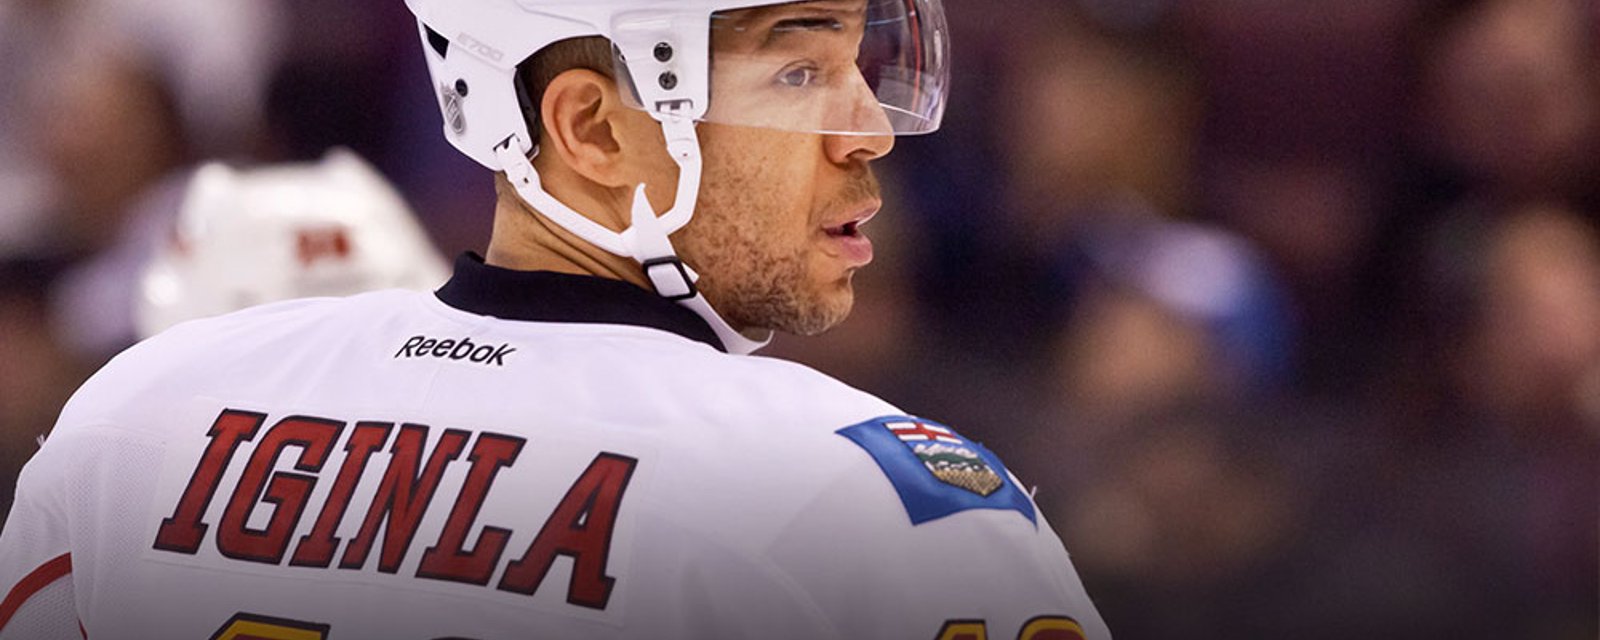 Report: Iginla considering the “R word” amidst quiet offseason, shares plans